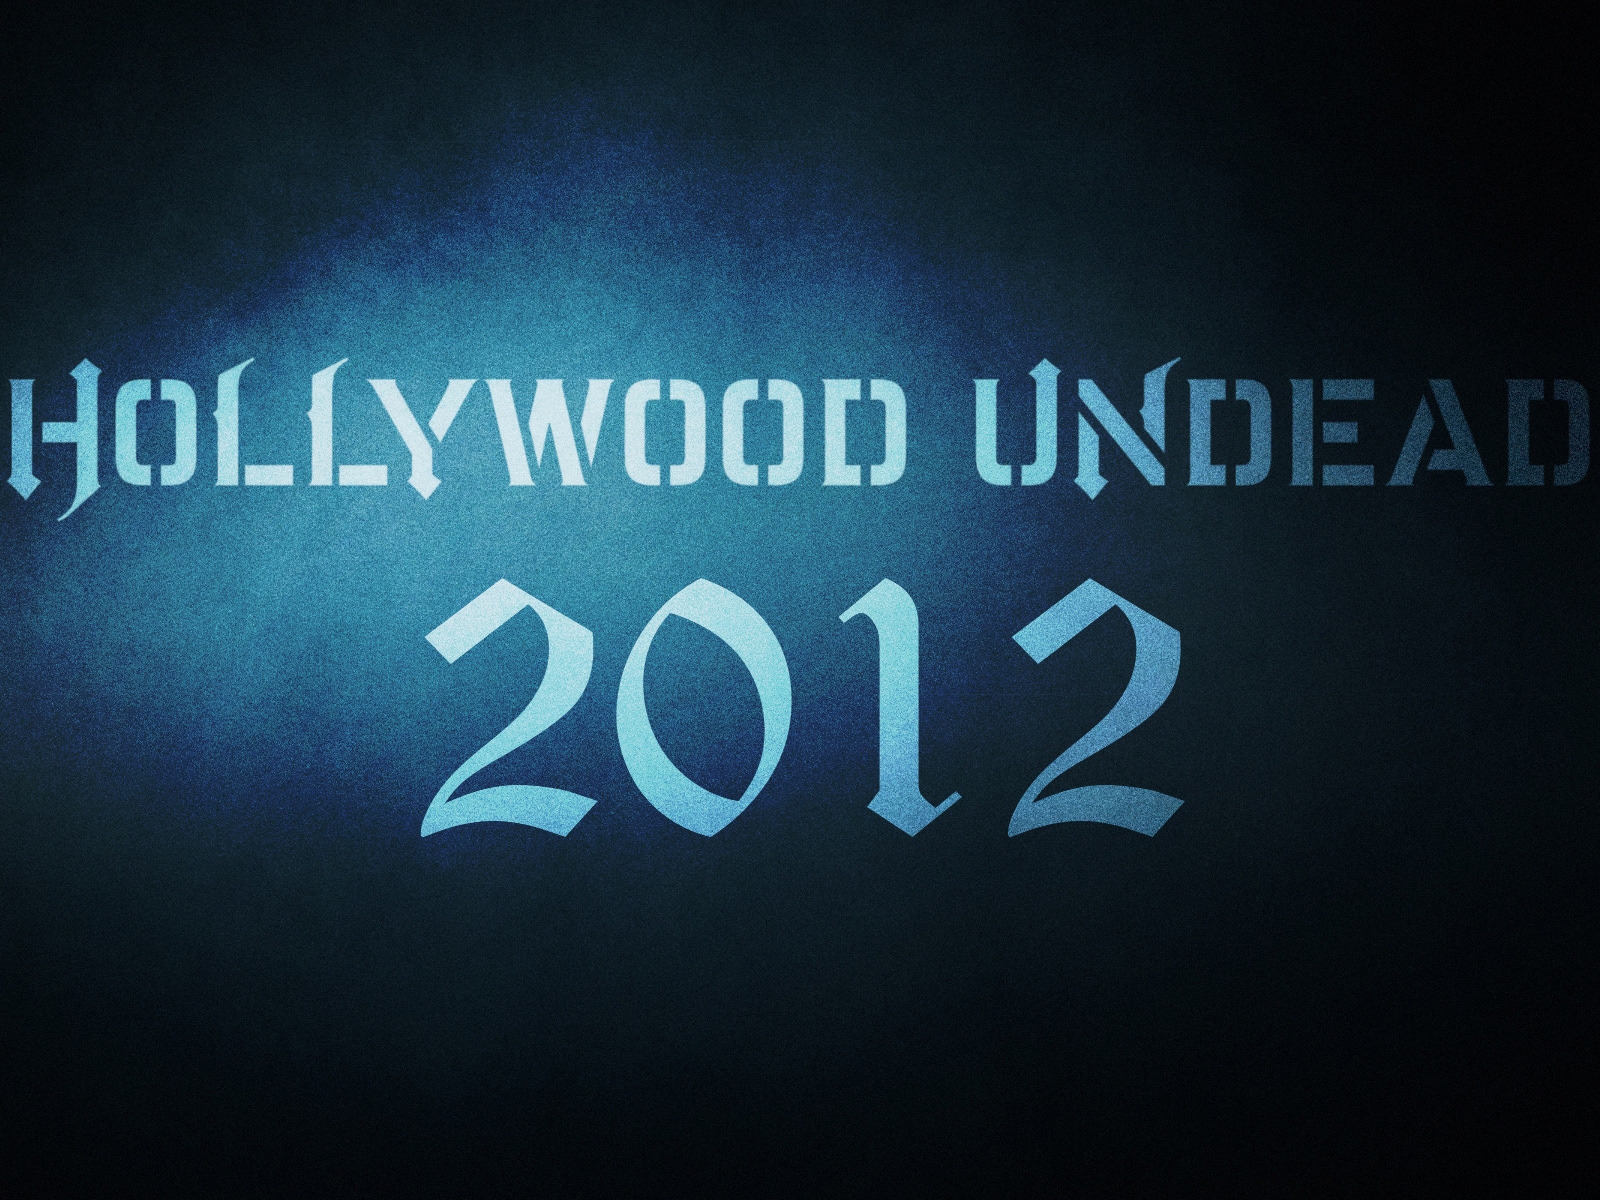 Hollywood Undead 2012 for 1600 x 1200 resolution